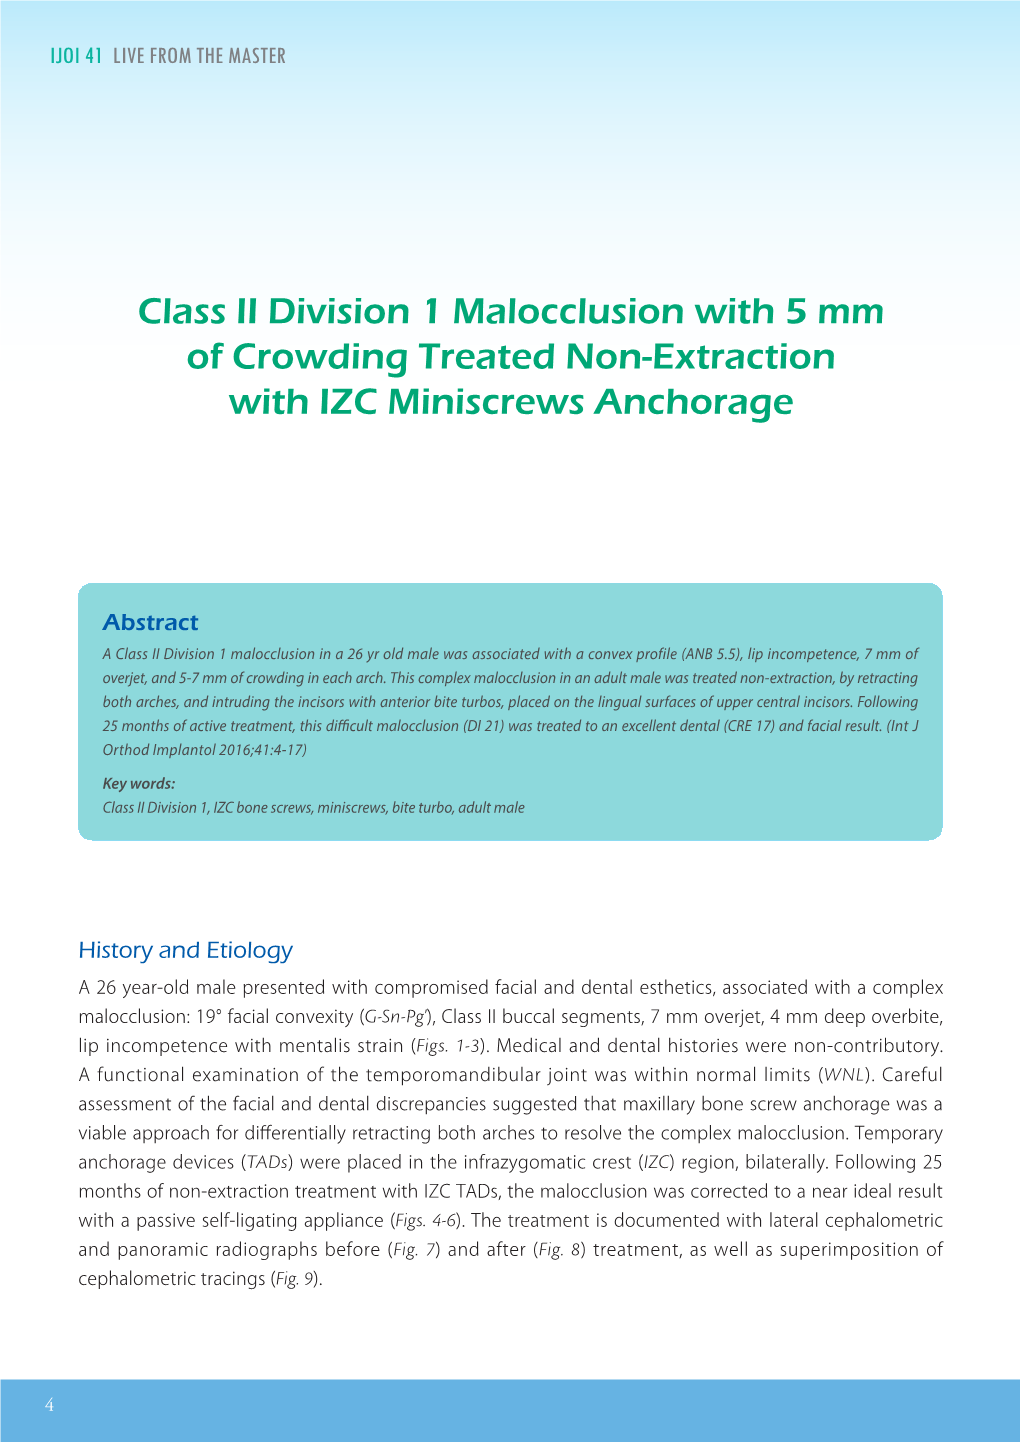 Class II Division 1 Malocclusion with 5 Mm of Crowding Treated Non-Extraction with IZC Miniscrews Anchorage IJOI 41